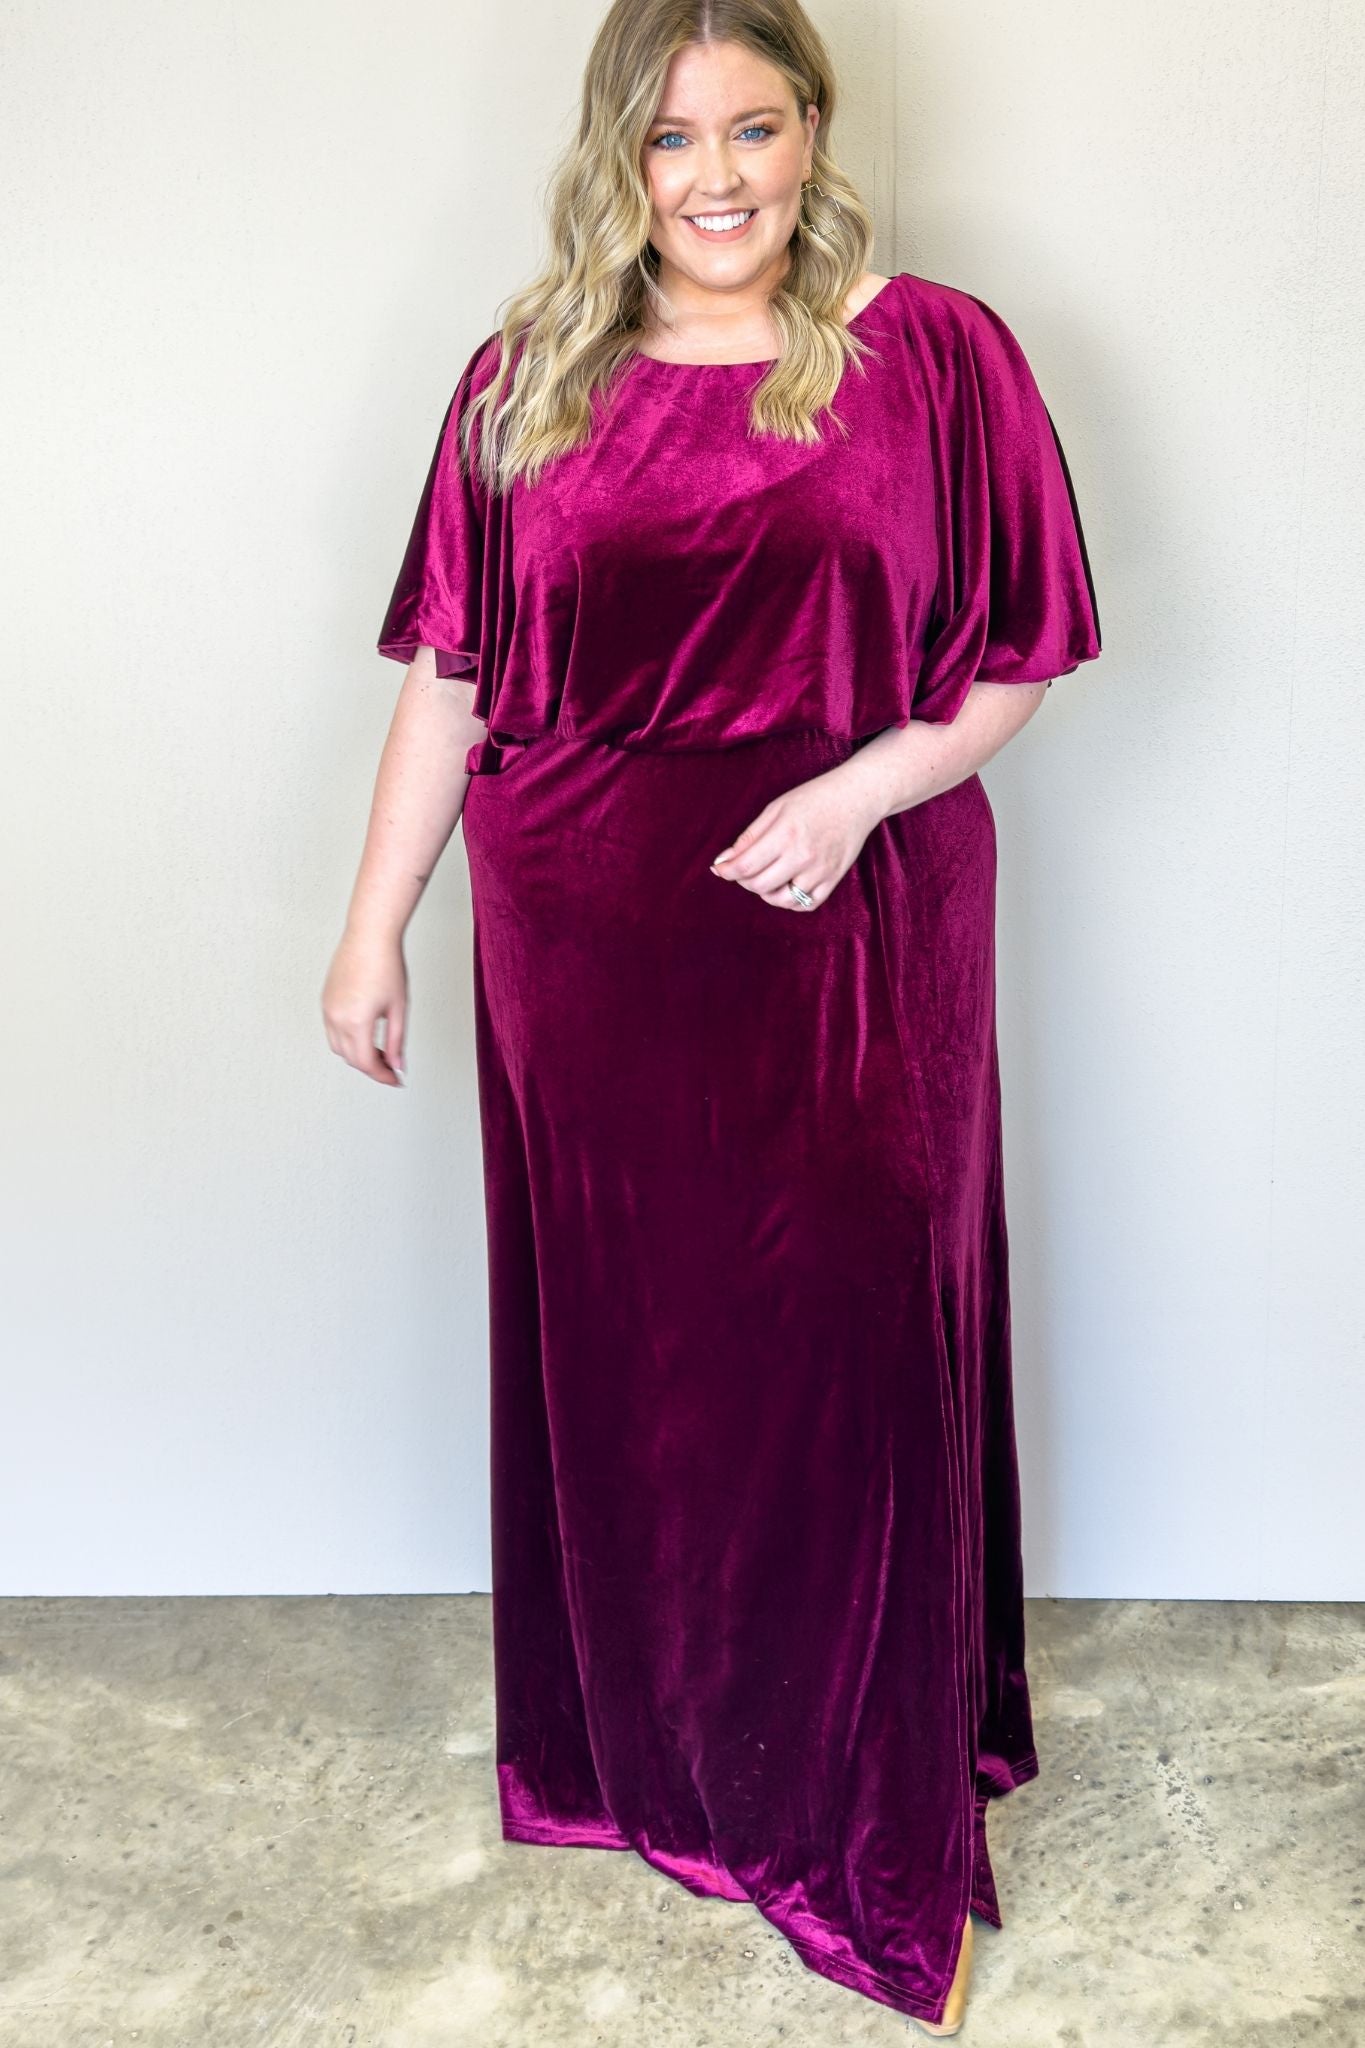 A stunning burgundy velvet dress, perfect for any occasion. Its rich color and luxurious fabric make it a must-have in your wardrobe.